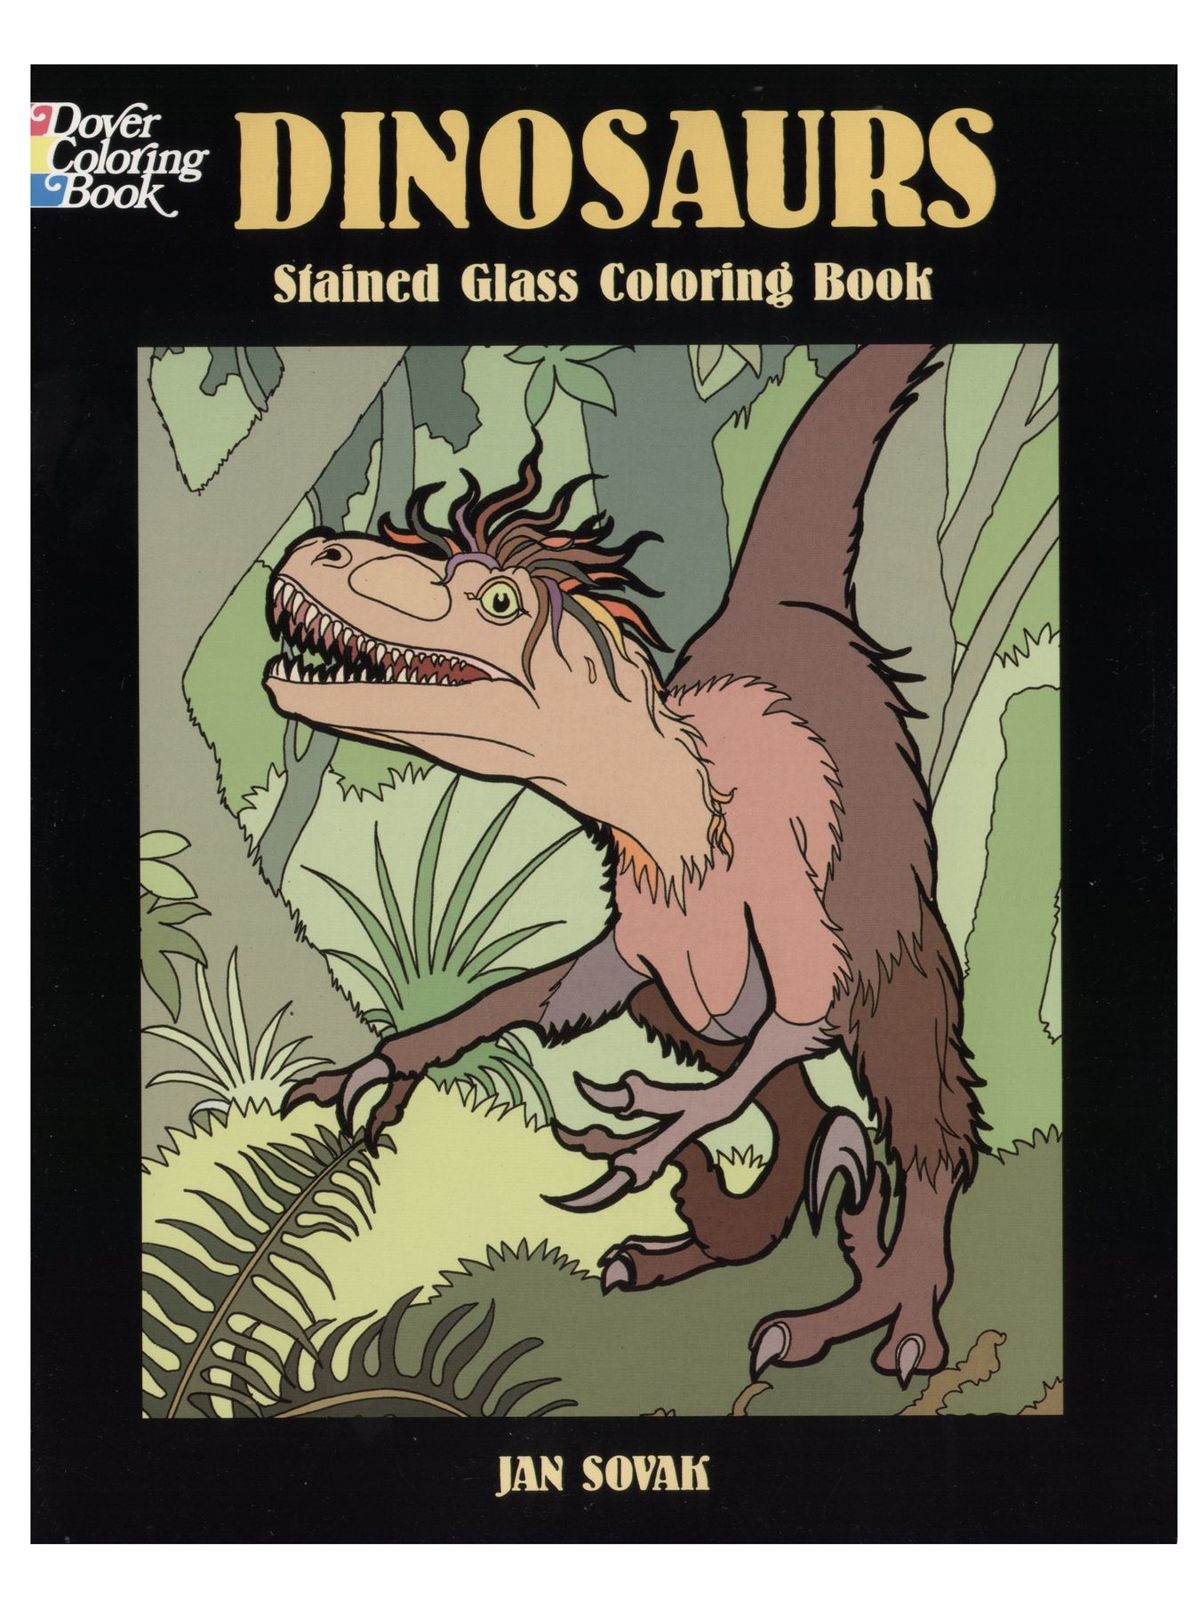 Dinosaurs Stained Glass Coloring Book Dinosaurs Stained Glass Coloring Book